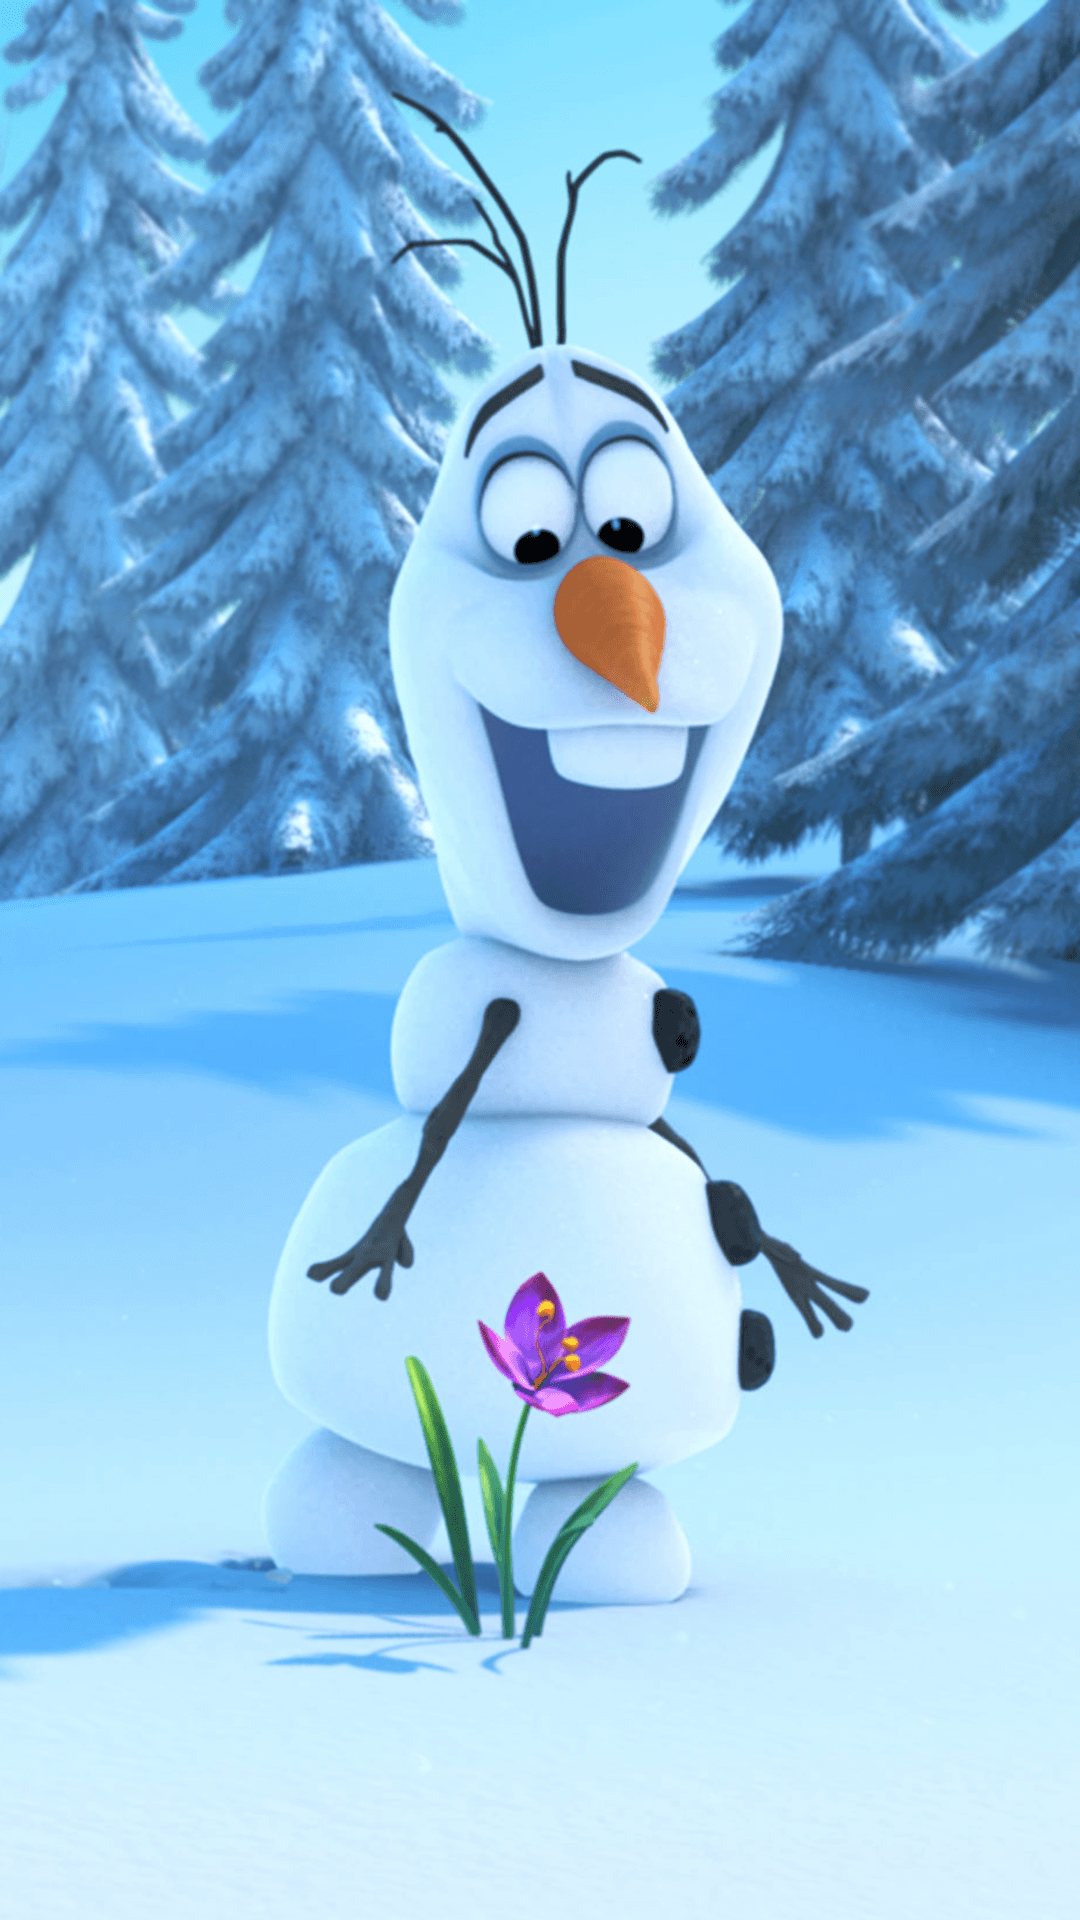 Download Our HD Frozen Olaf Wallpaper For Android Phones .0394